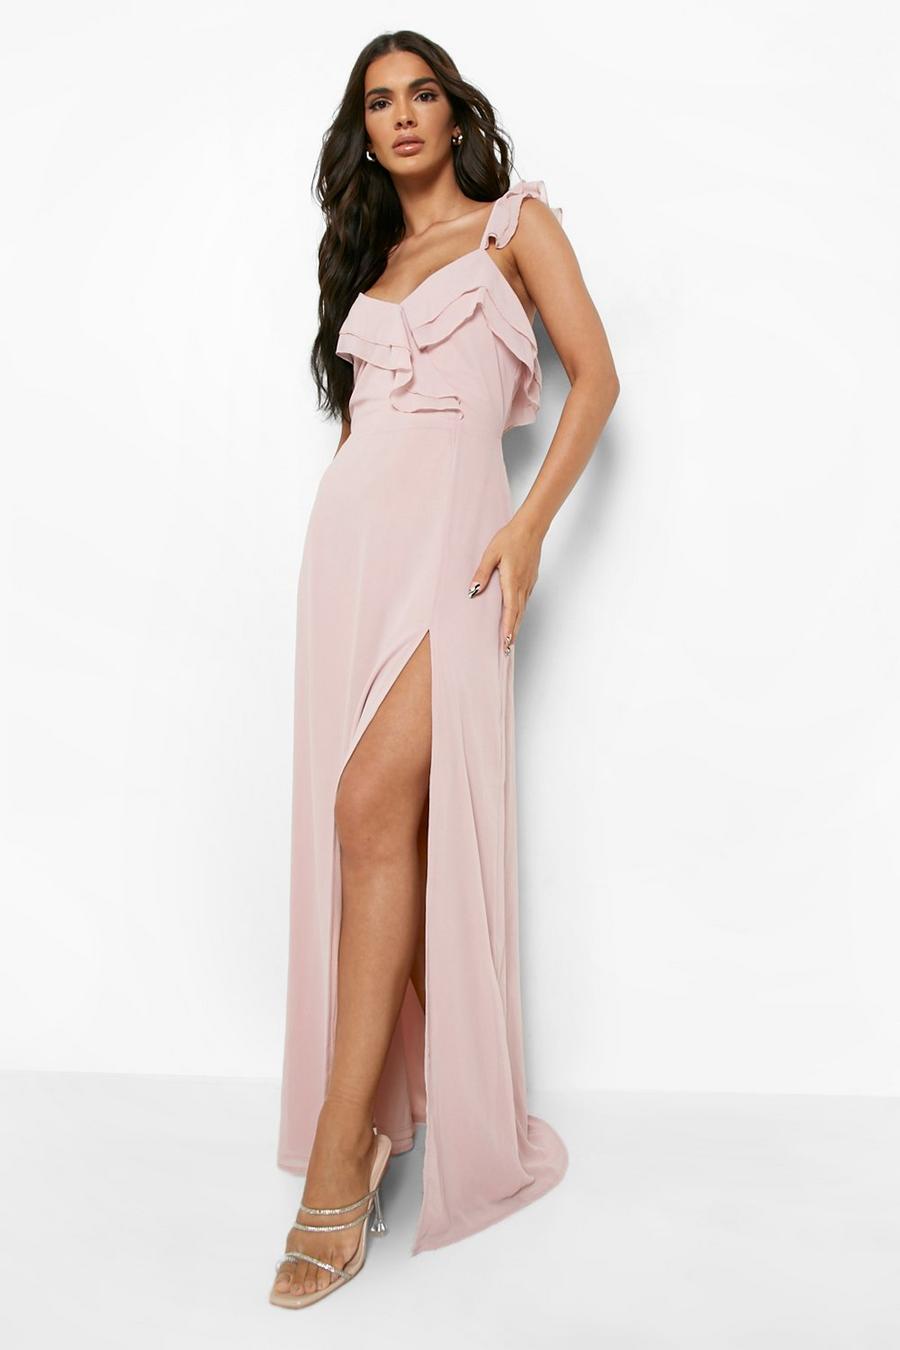 Soft pink Frill Detail Strappy Maxi Dress